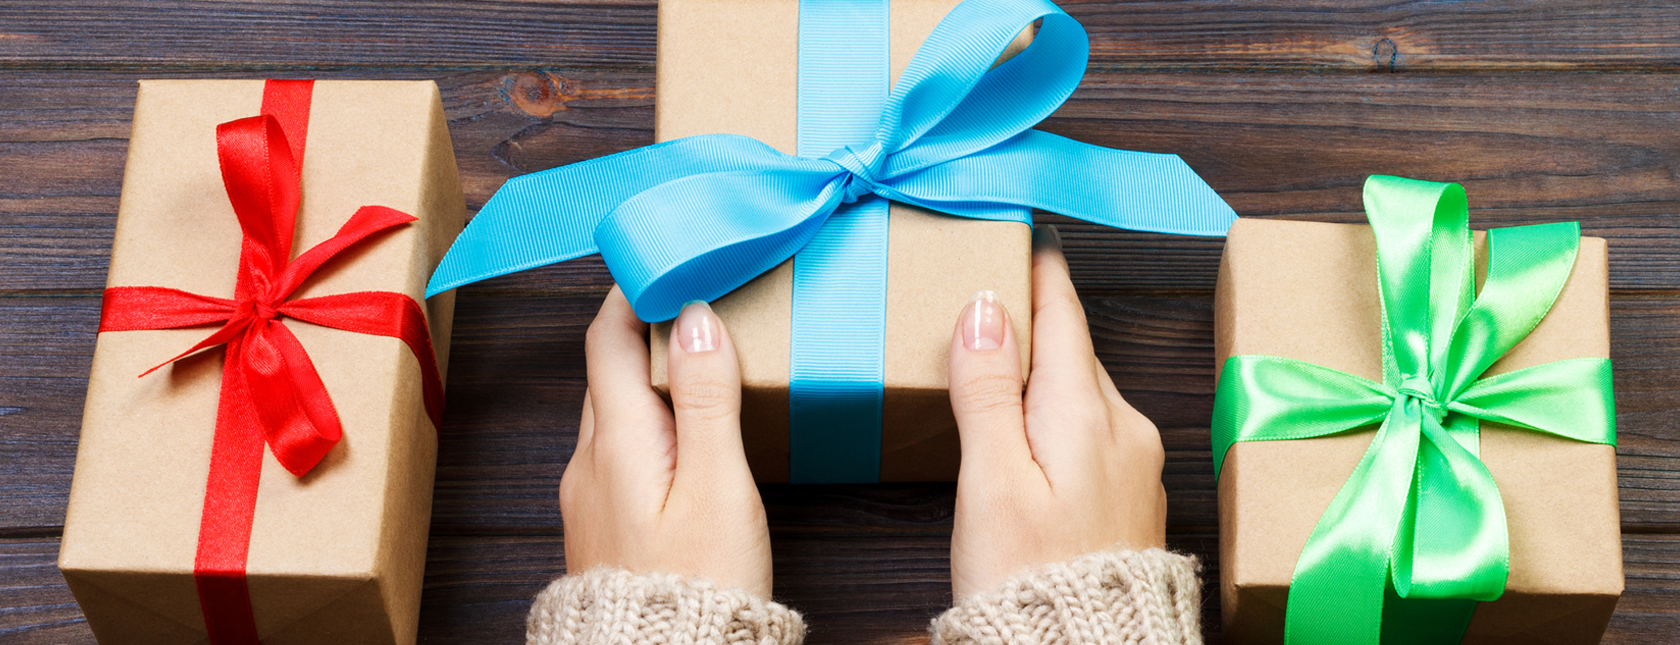 Gift Giving on a Budget